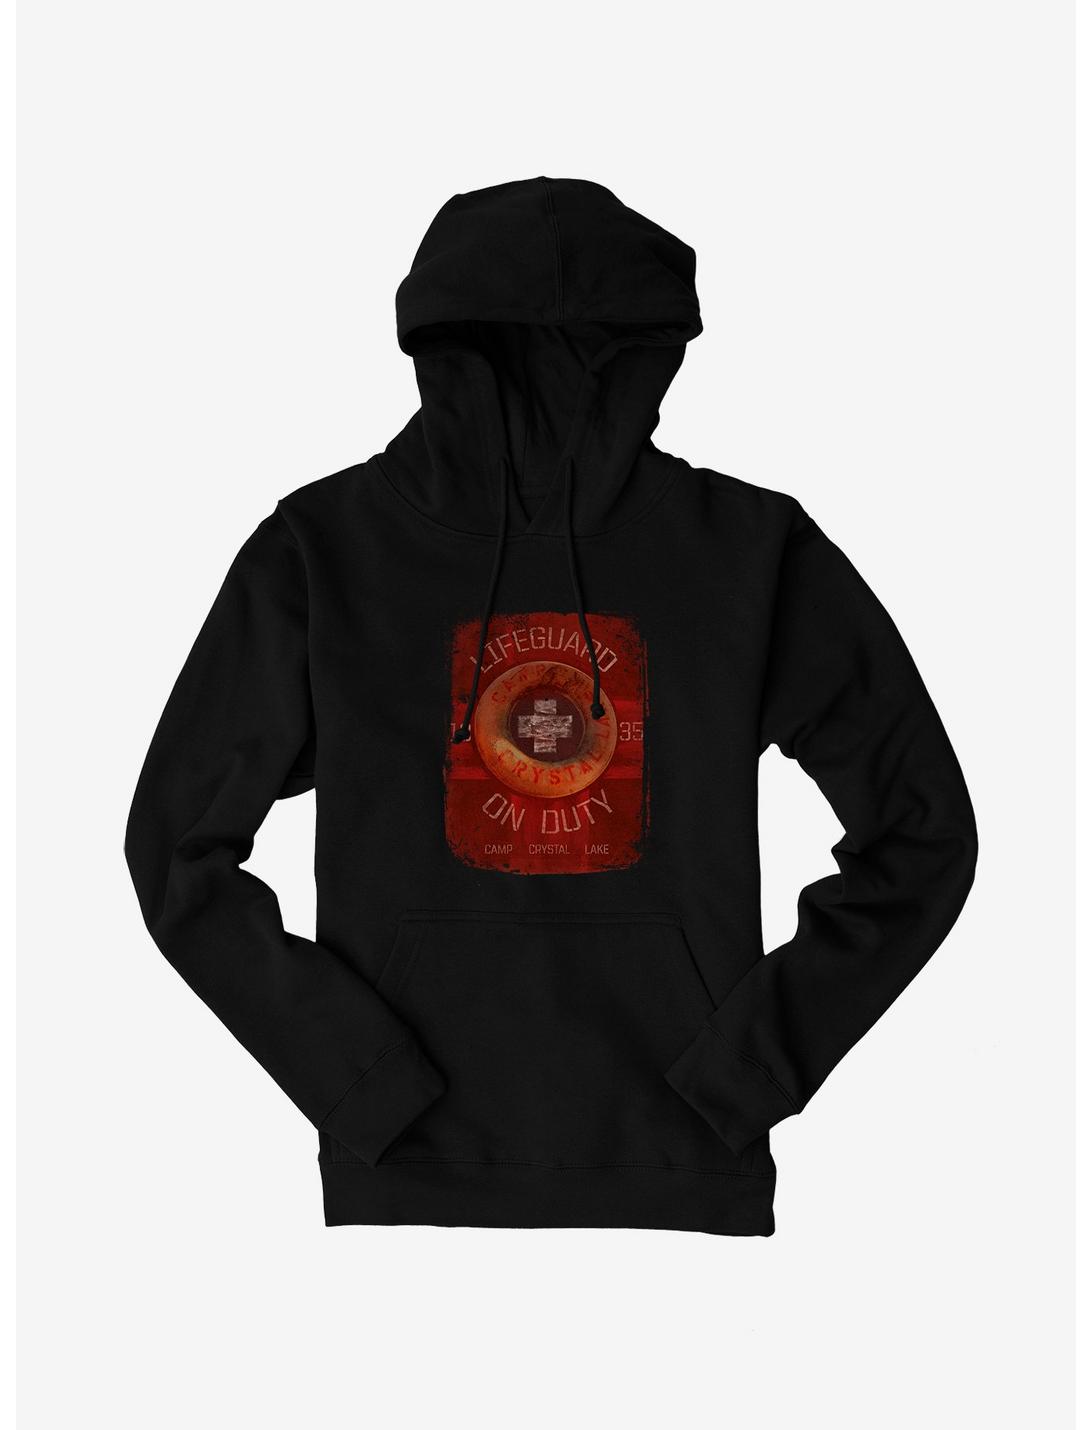 Friday The 13th Lifeguard On Duty Hoodie, BLACK, hi-res